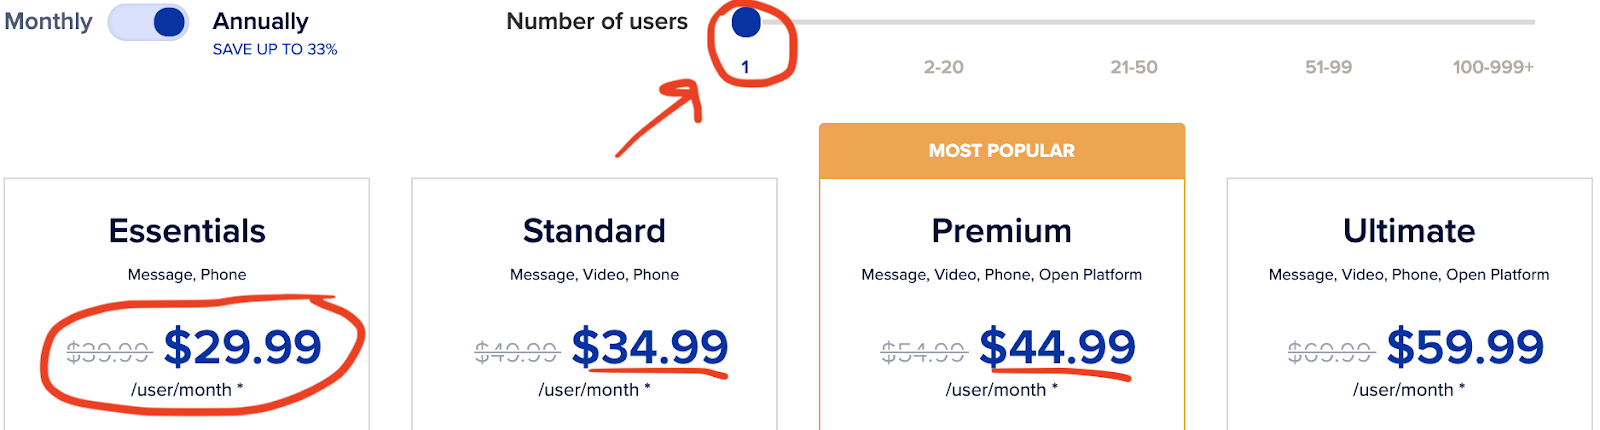 Ring Central Pricing 1 User